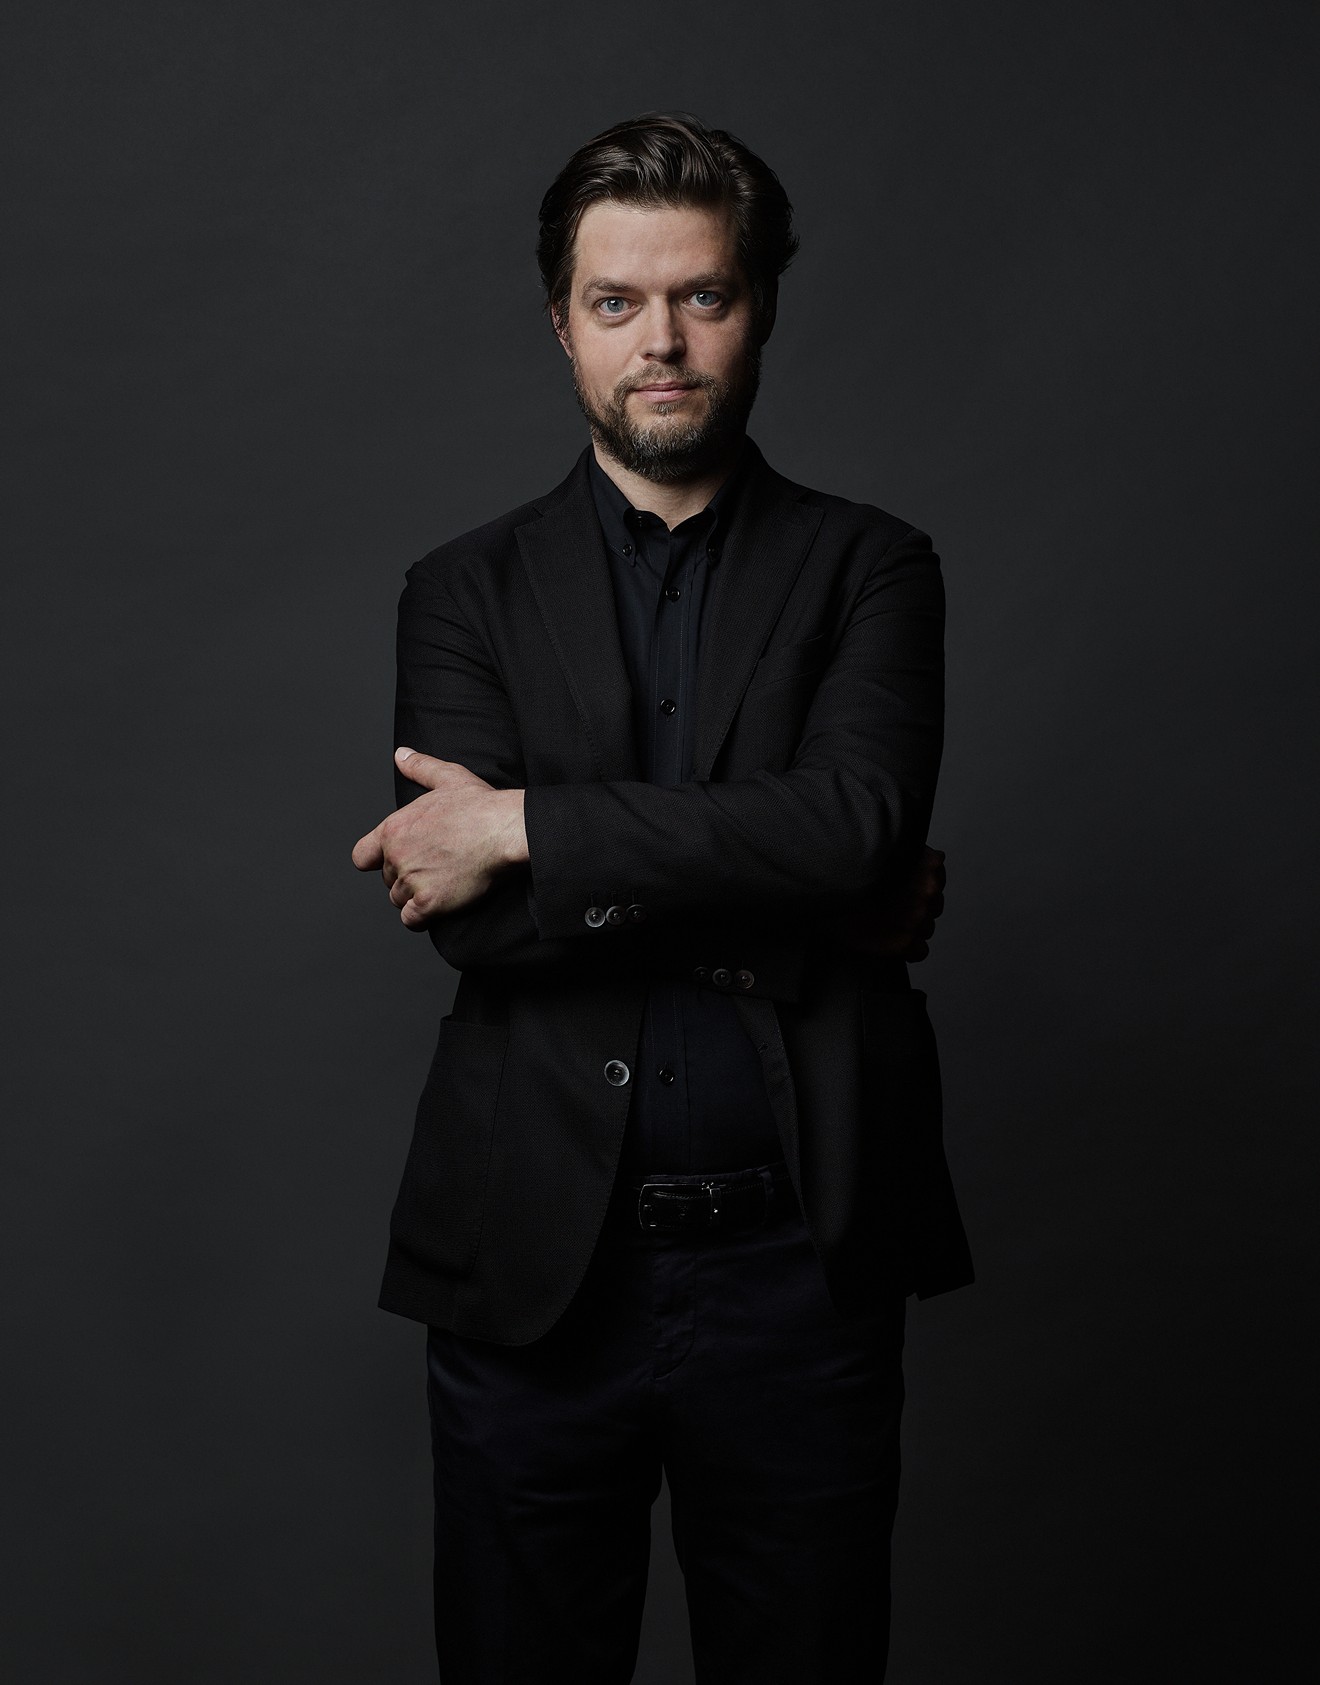 Juraj Valcuha is the young dynamo who will next lead Houston Symphony as Music Director.